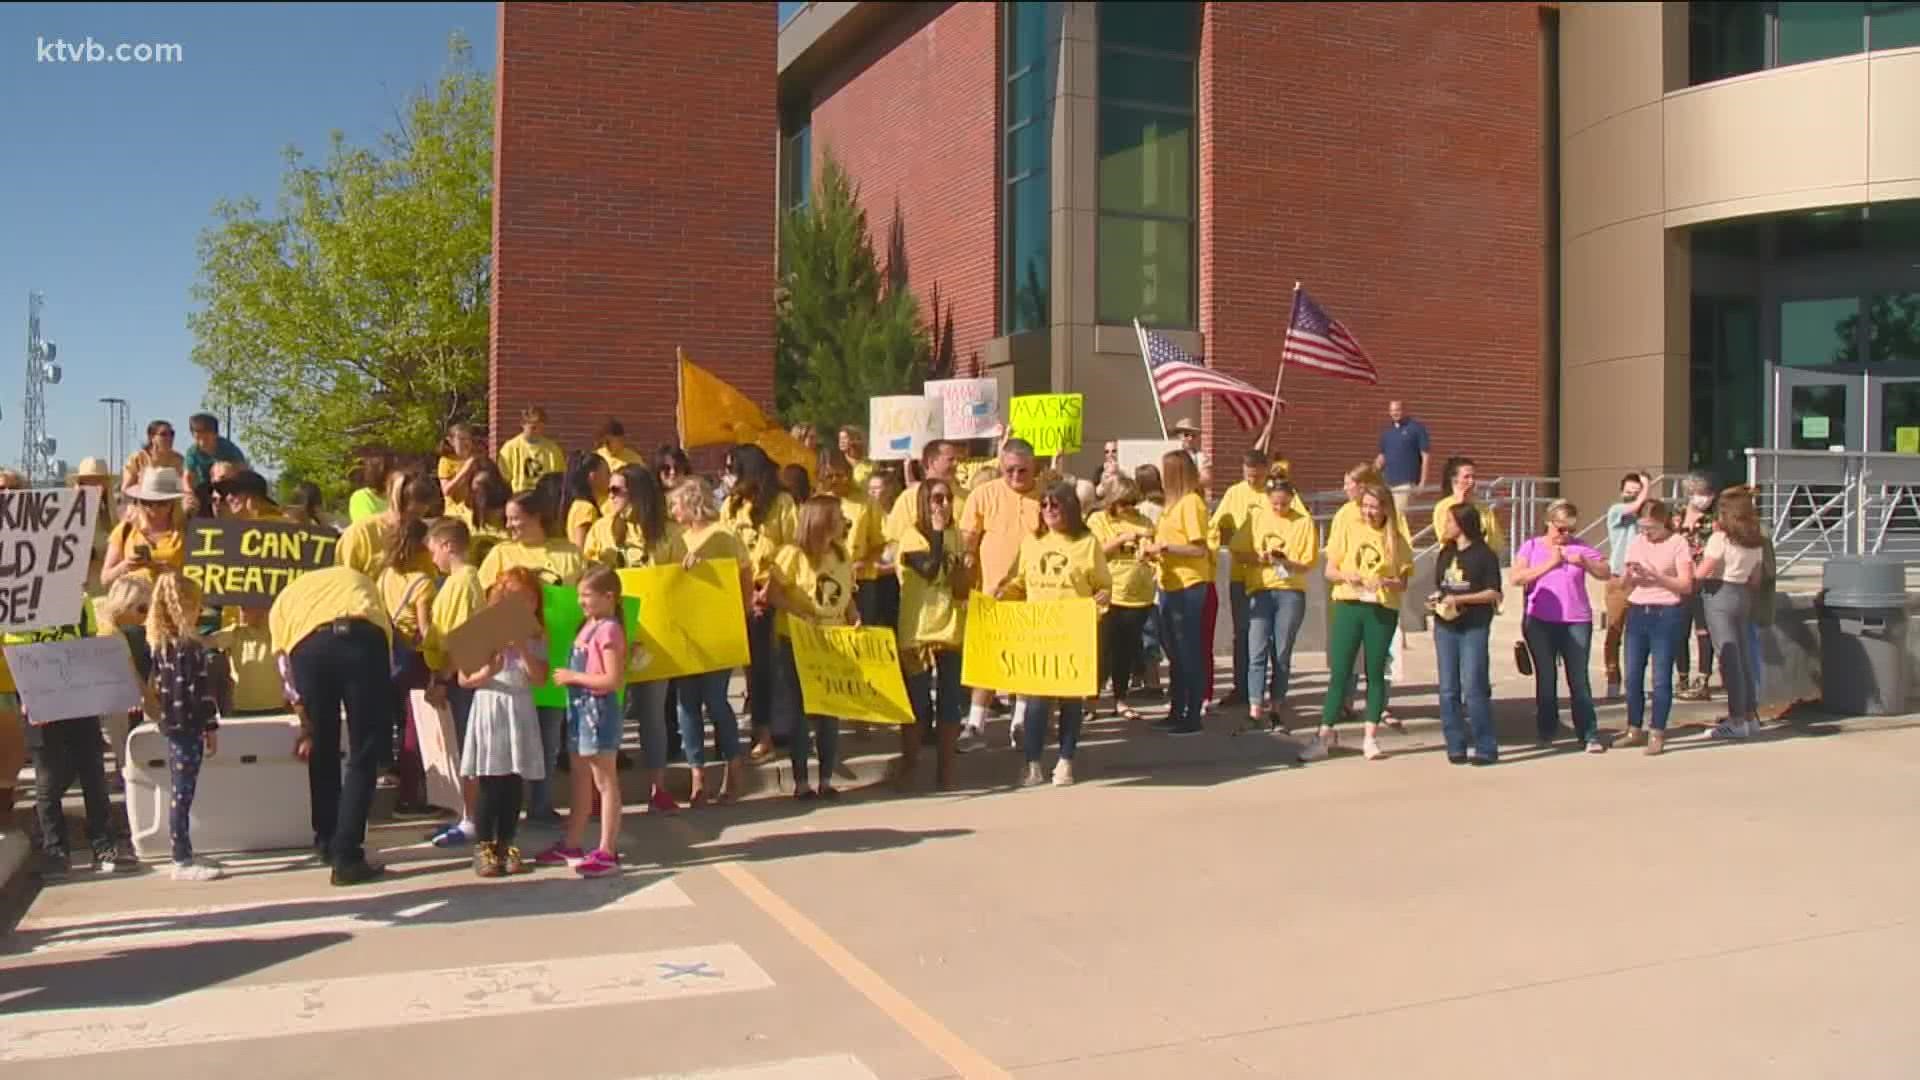 "I'll be really interested to see if these issues were seeing in these school board elections," one expert told KTVB.